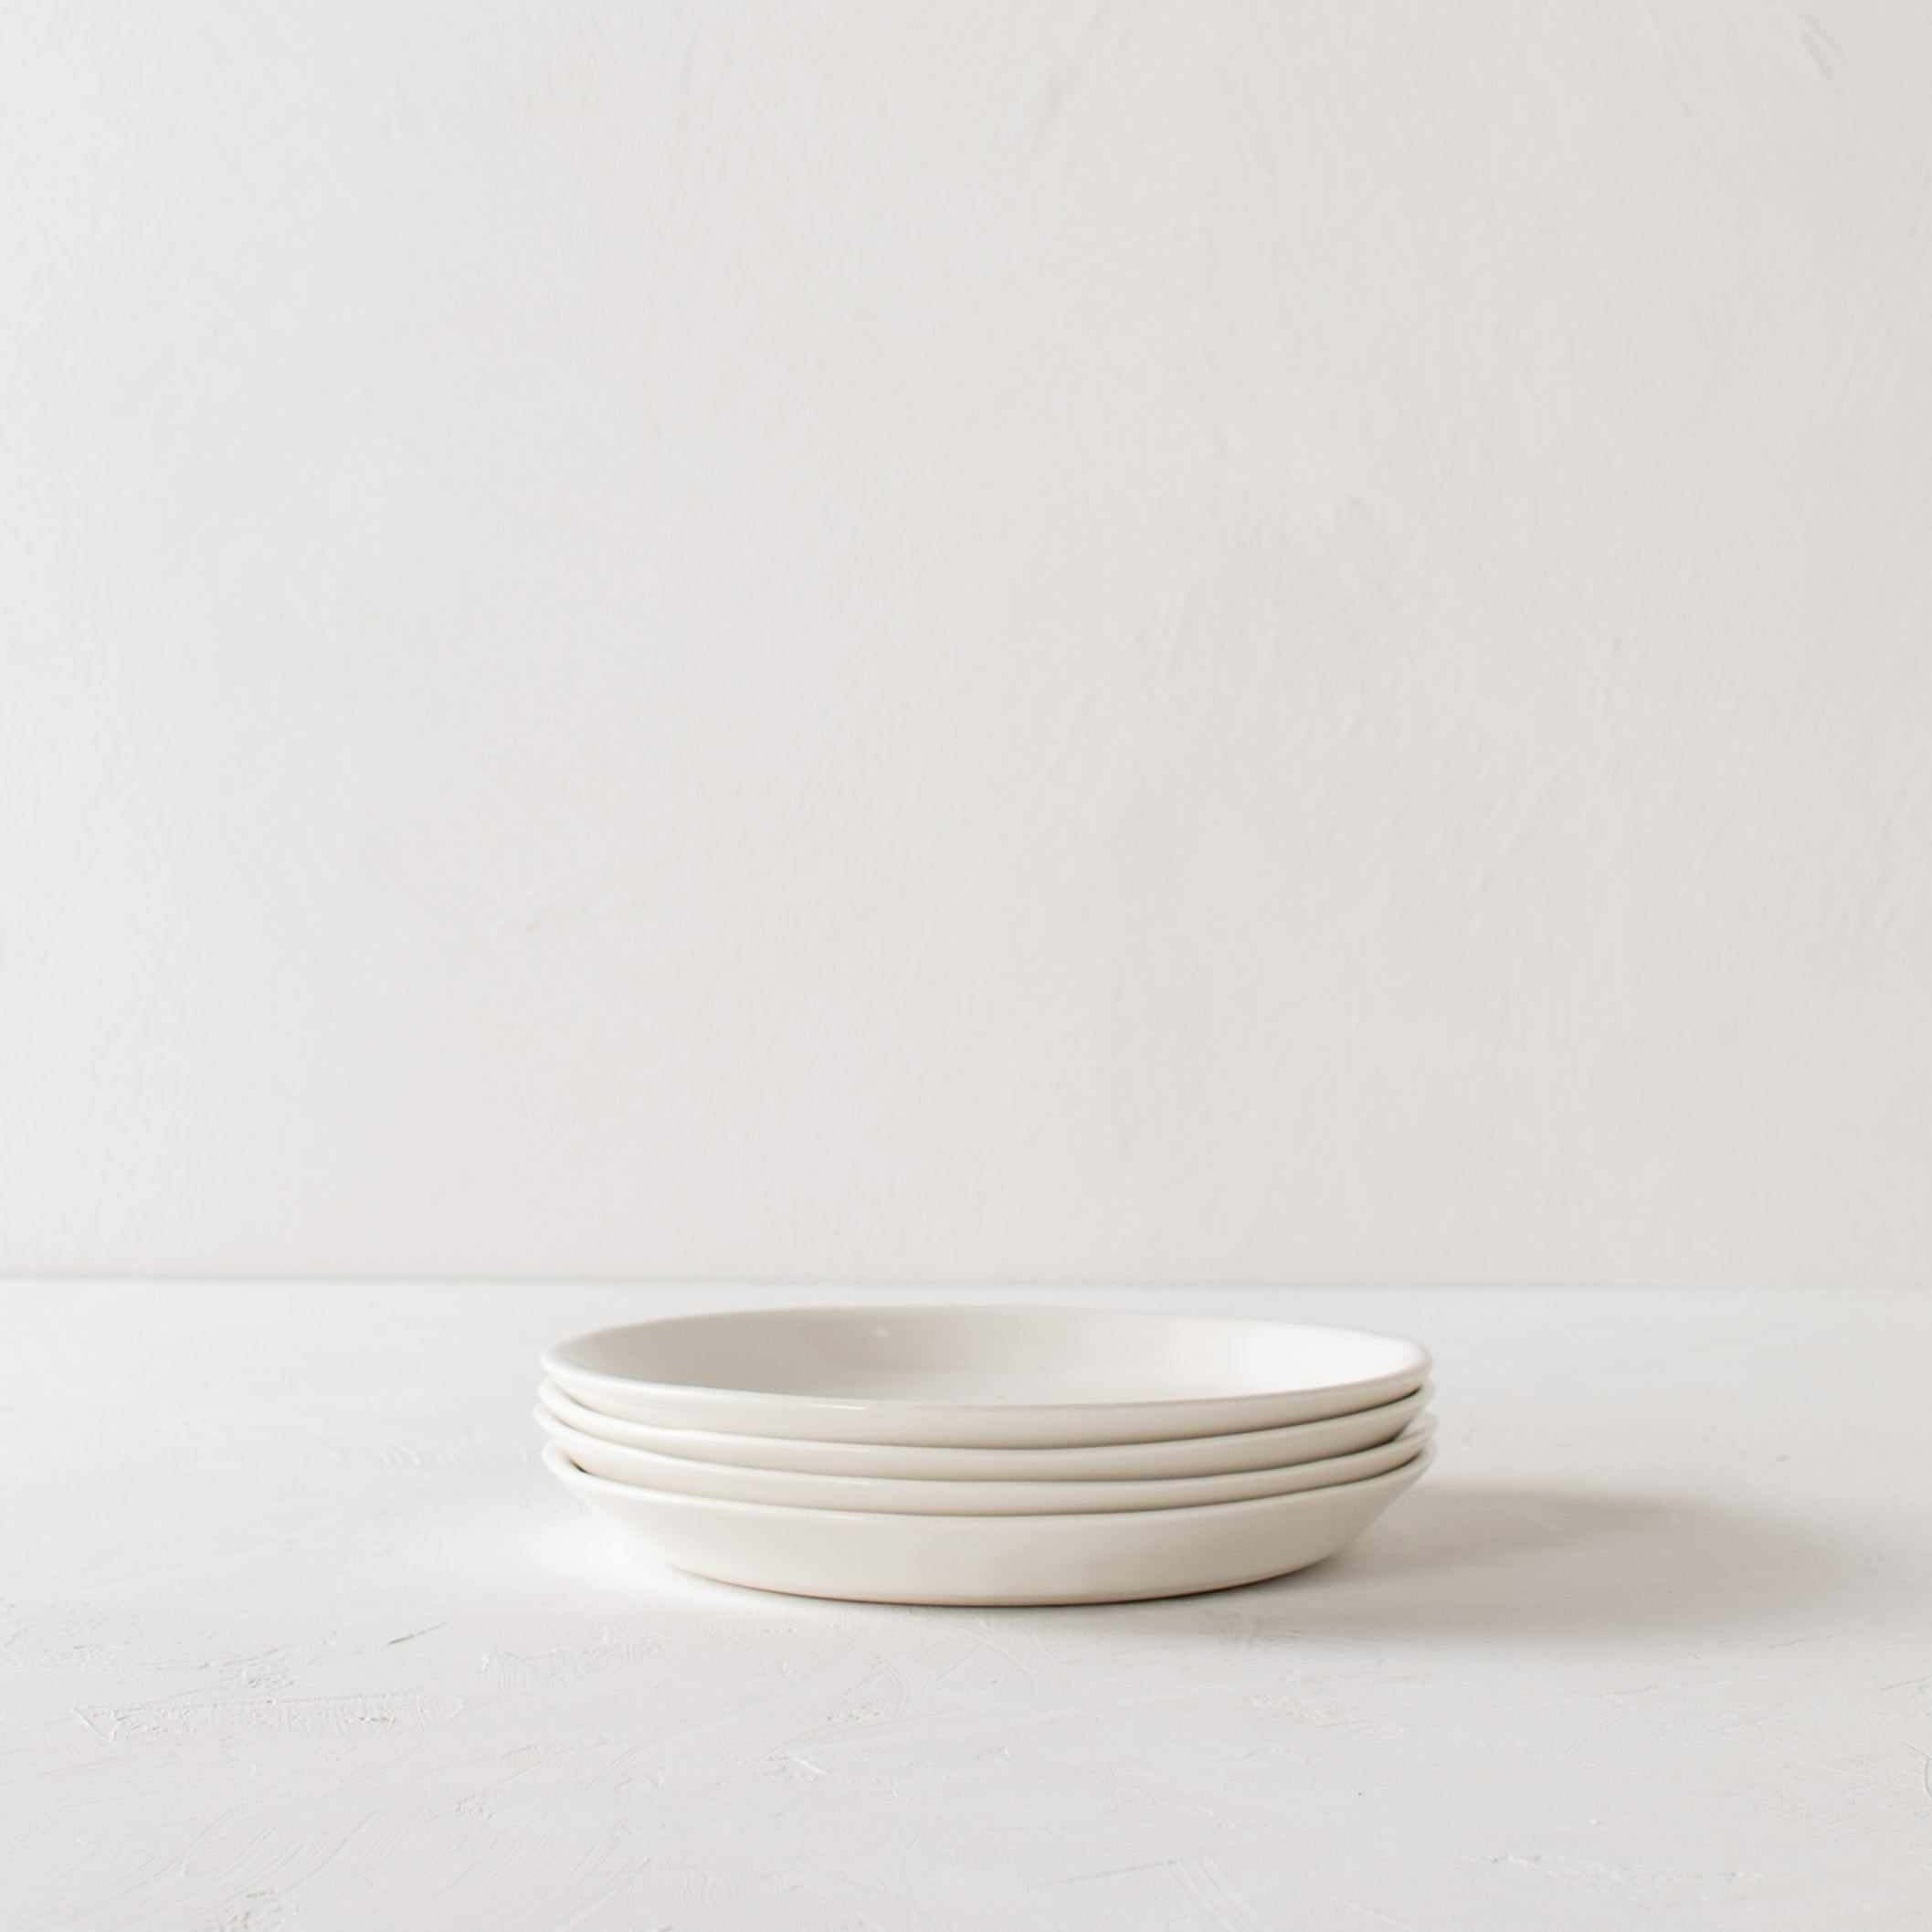 Stacked minimal salad plates. Four stacked plates on a textured white tabletop and white textured backdrop. Handmade ceramic plates designed and sold by Convivial Production, Kansas City Ceramics.